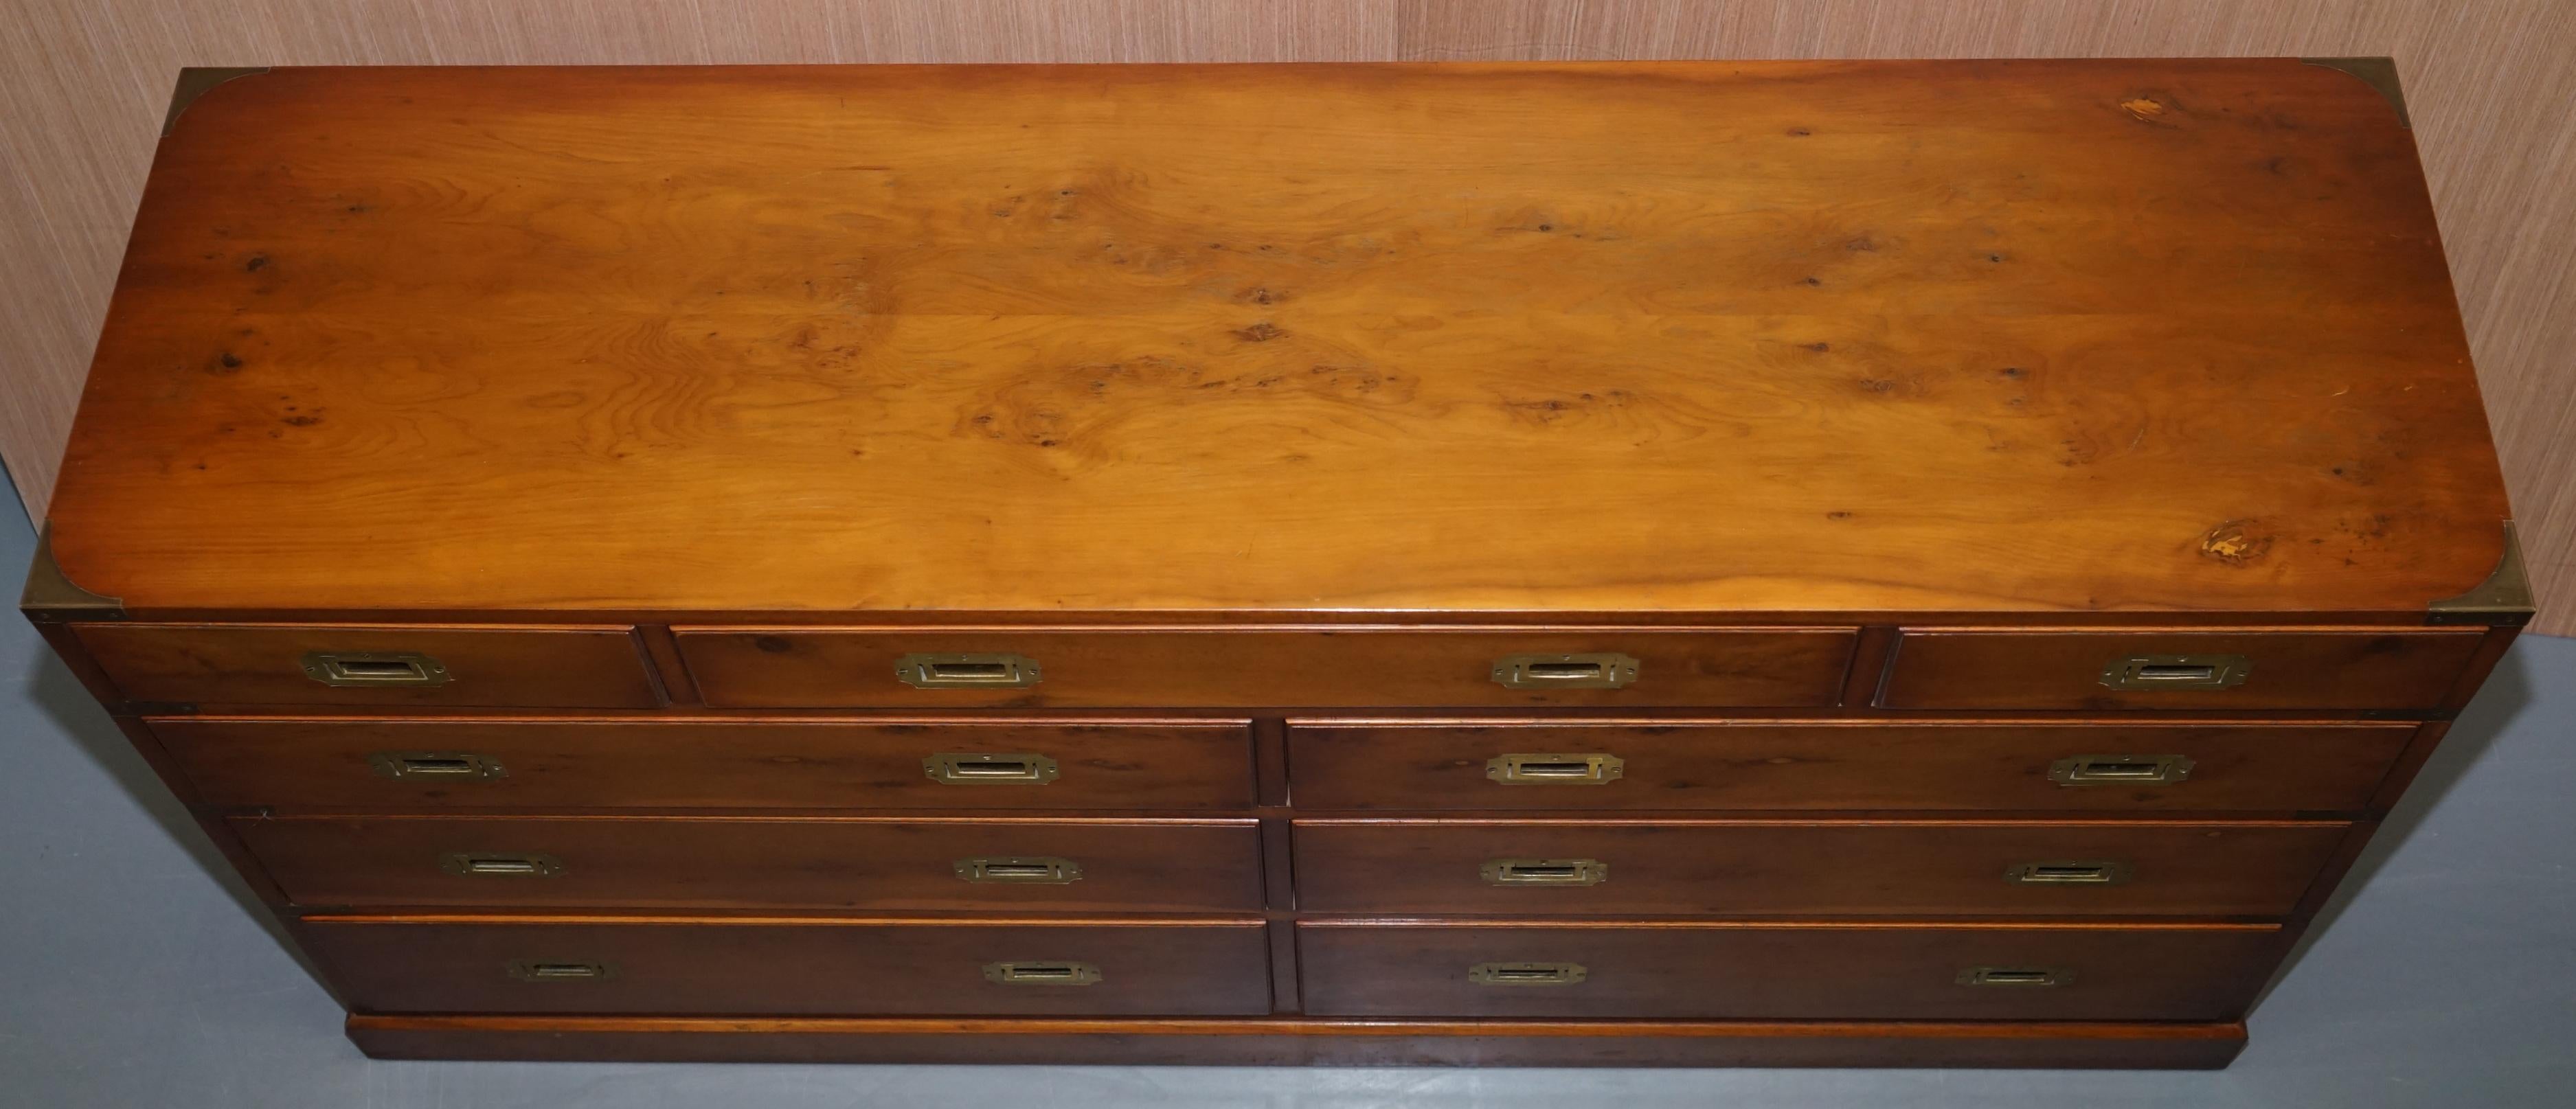 Hand-Crafted Bradley Furniture Burr Yew Wood Military Campaign Low Sideboard Chest of Drawers